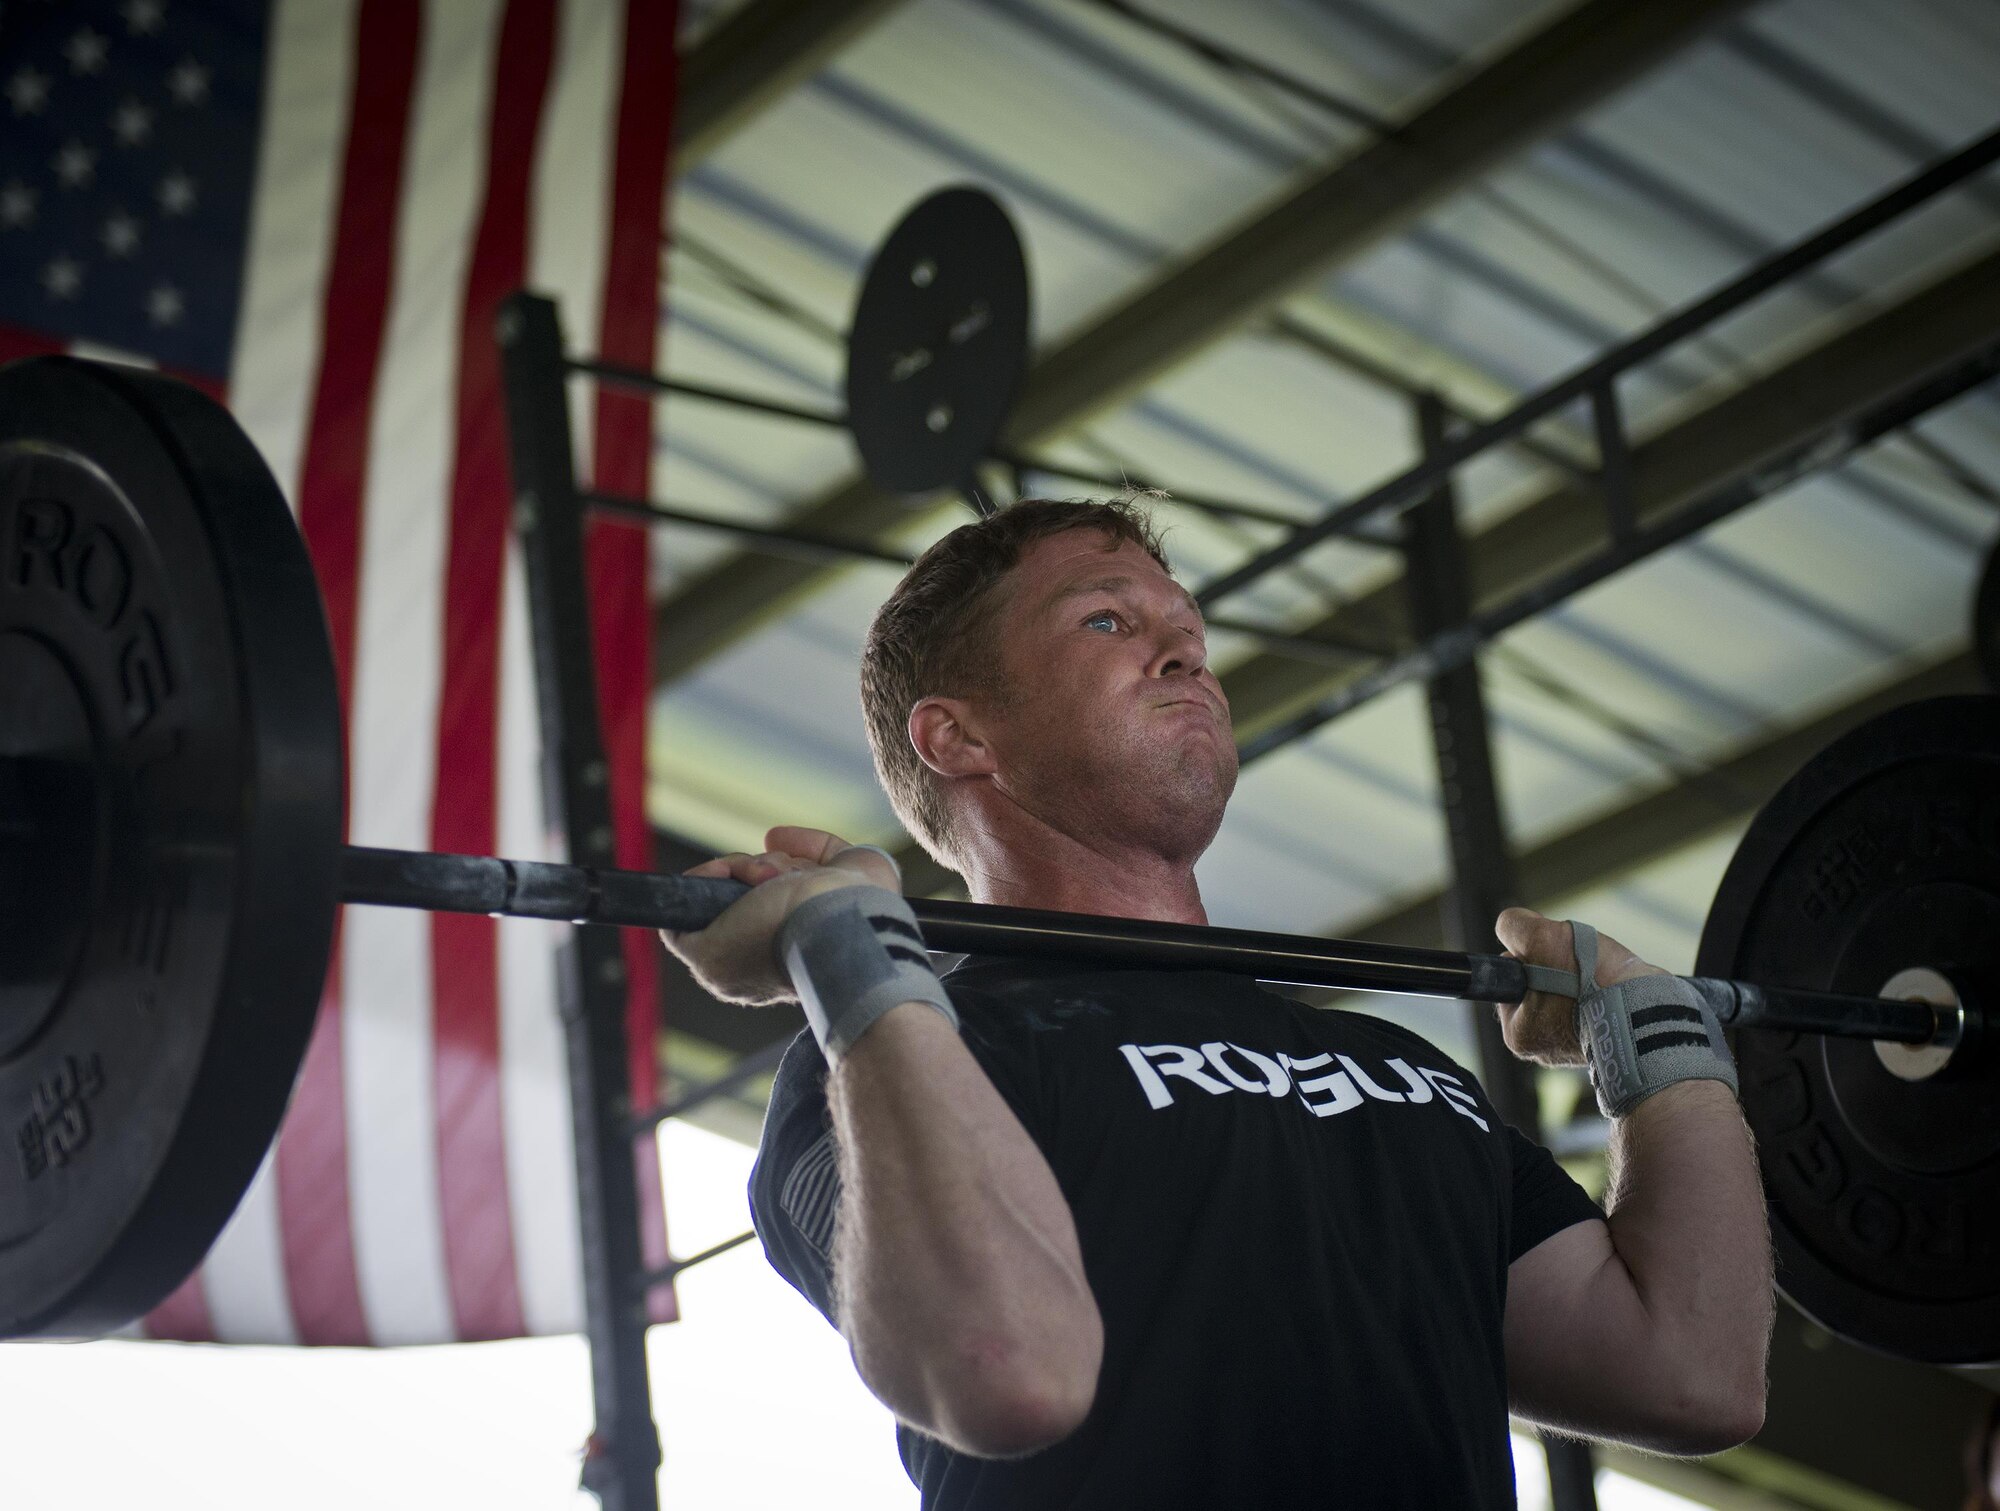 Devin Widdoes, 7th Special Forces Group, prepares to lift weights over his head during a team combat fit competition June 11 at Duke Field, Fla.  The three-round competition pushed the teams to their limits with repetitive weight lifting, rowing, sled-pulling and other kinetic activities.  (U.S. Air Force photo/Tech. Sgt. Sam King)